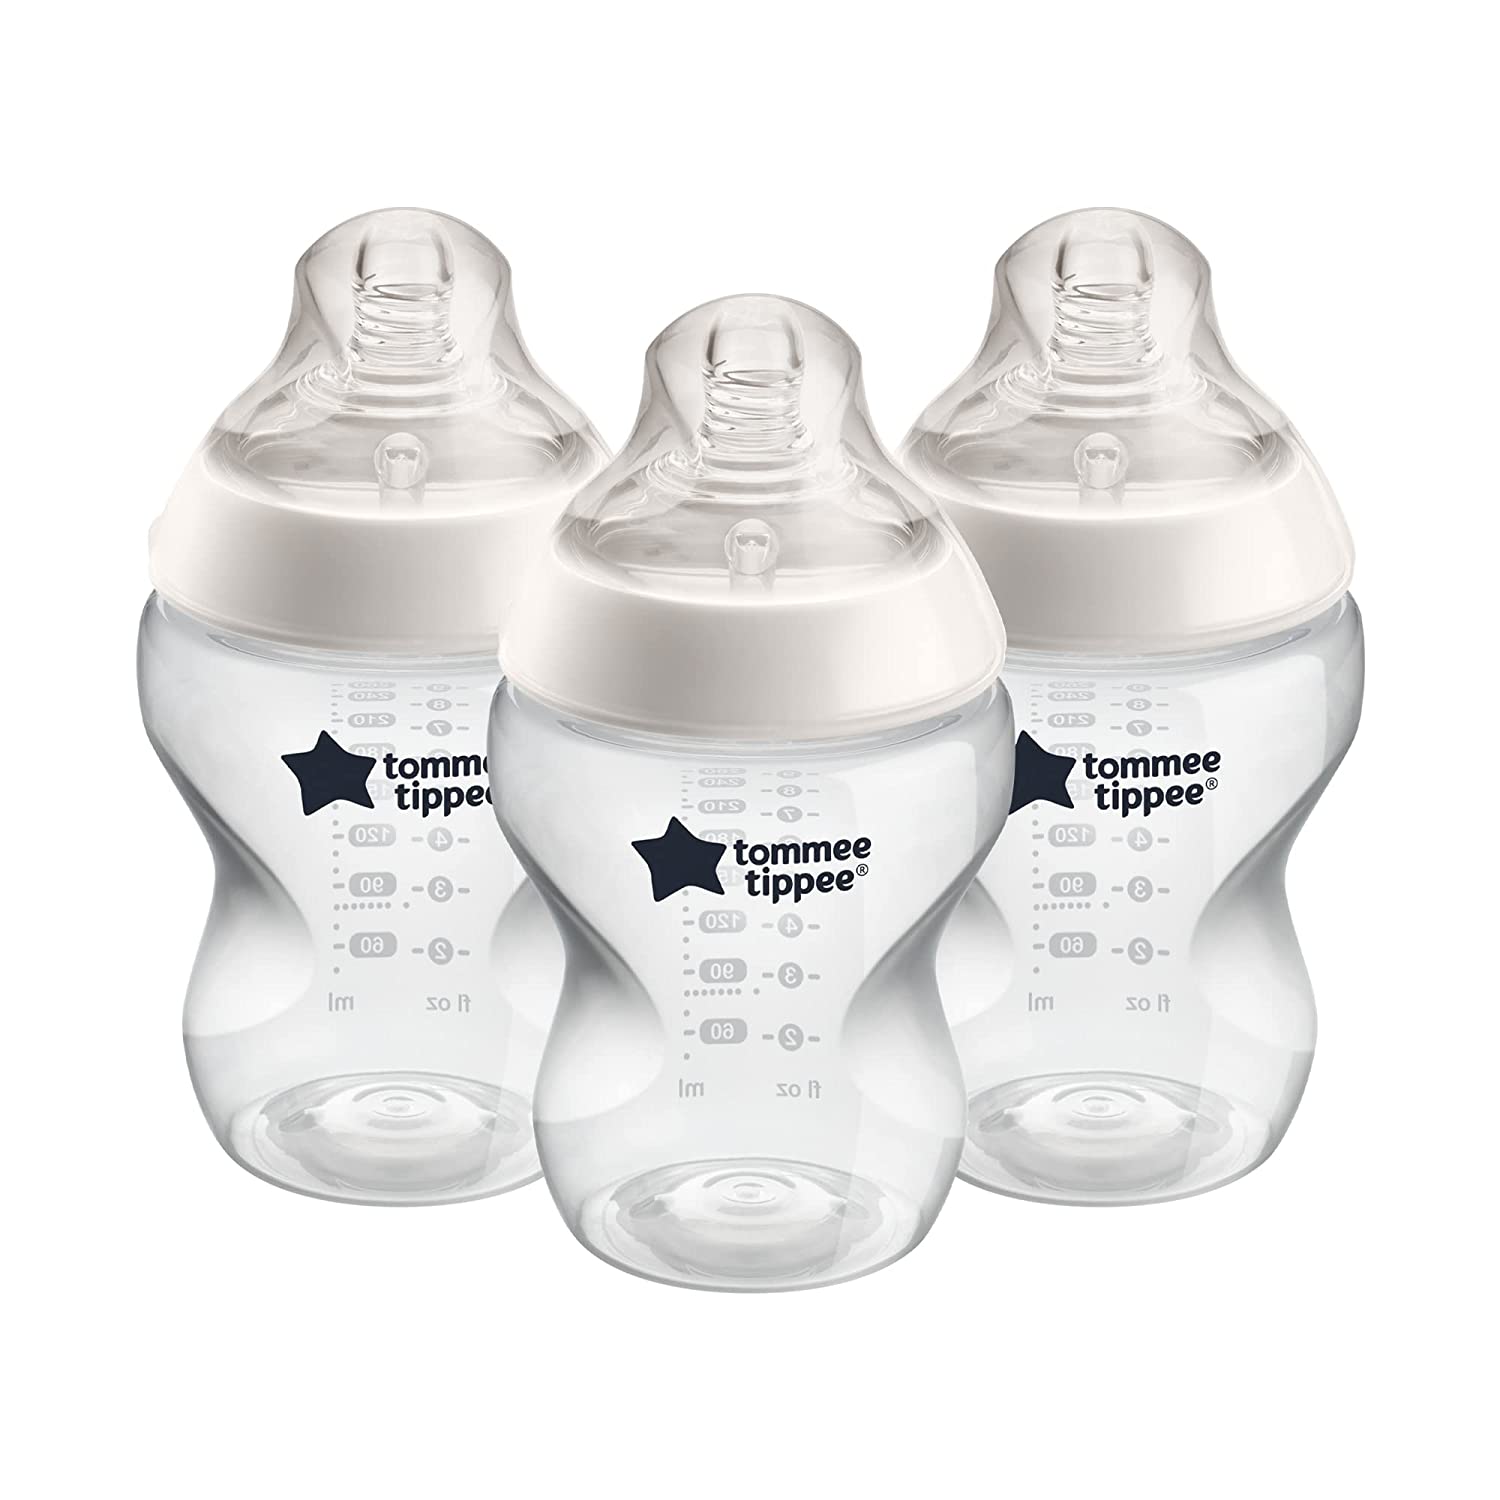 Tommee Tippee Closer to Nature Baby Bottles, 9oz, 3 count